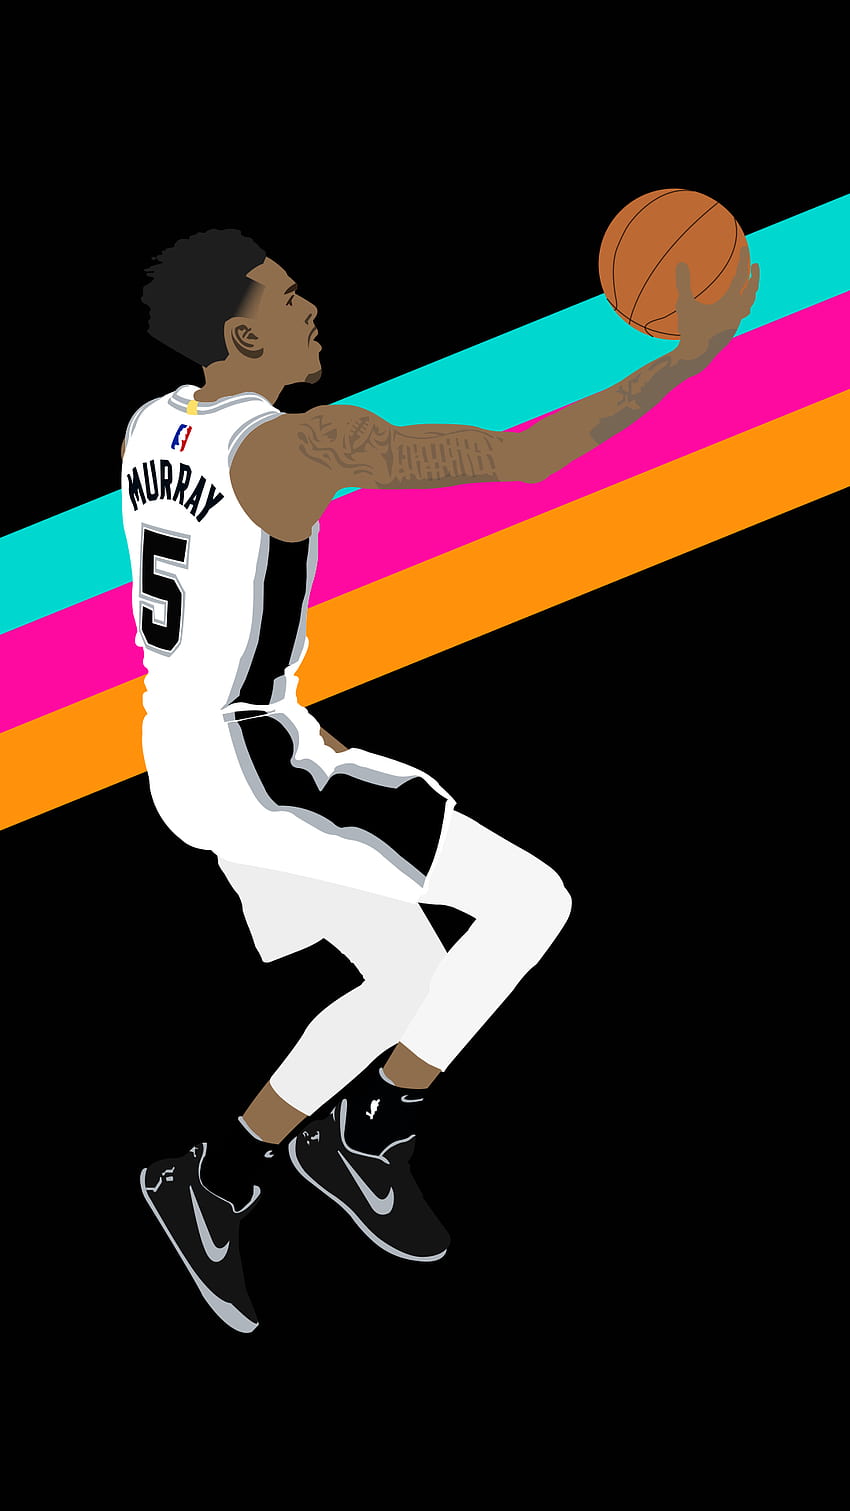 I made a Dejounte wallpaper to ease the pain of the Kawhi one I